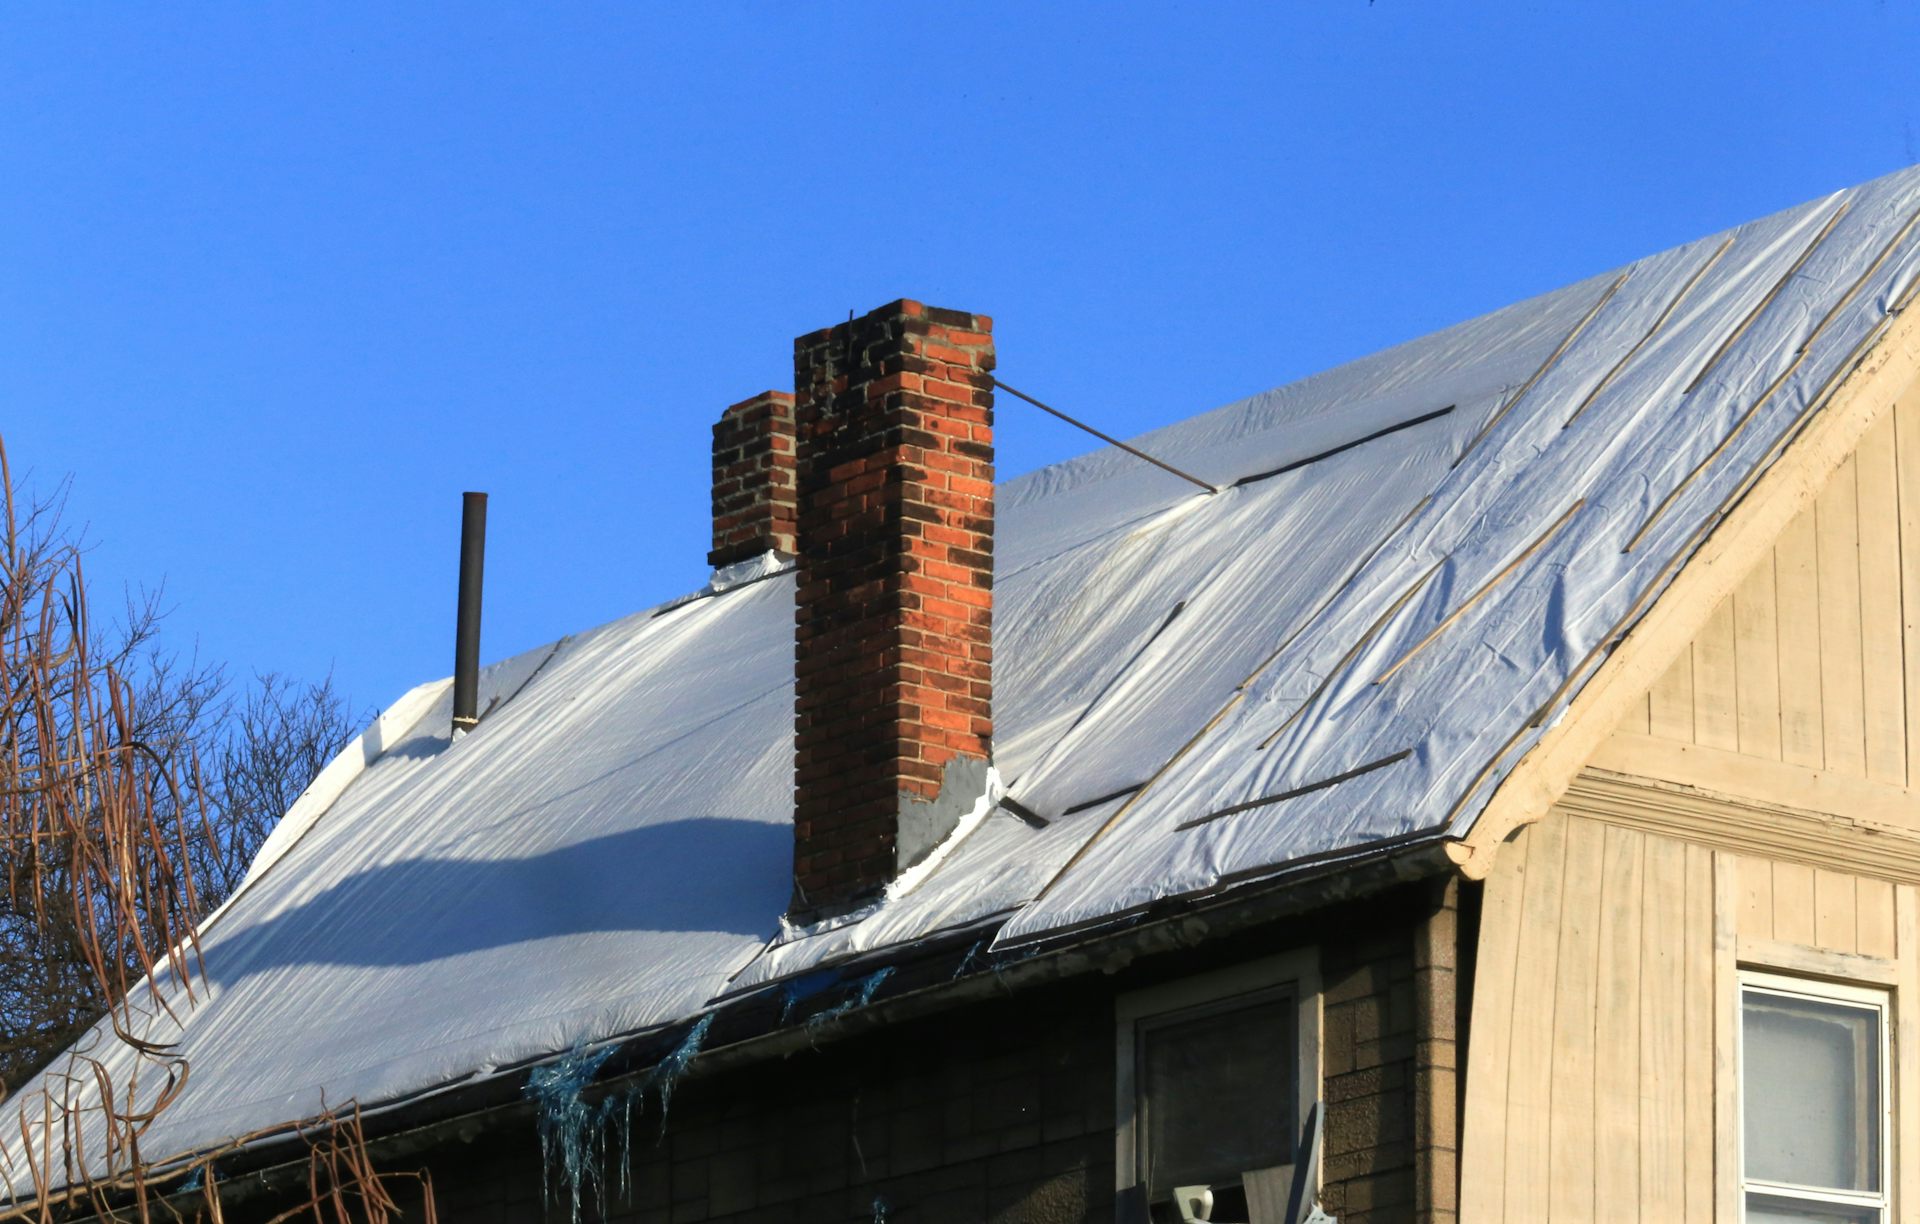 The roof of a building is covered in plastic tarp.